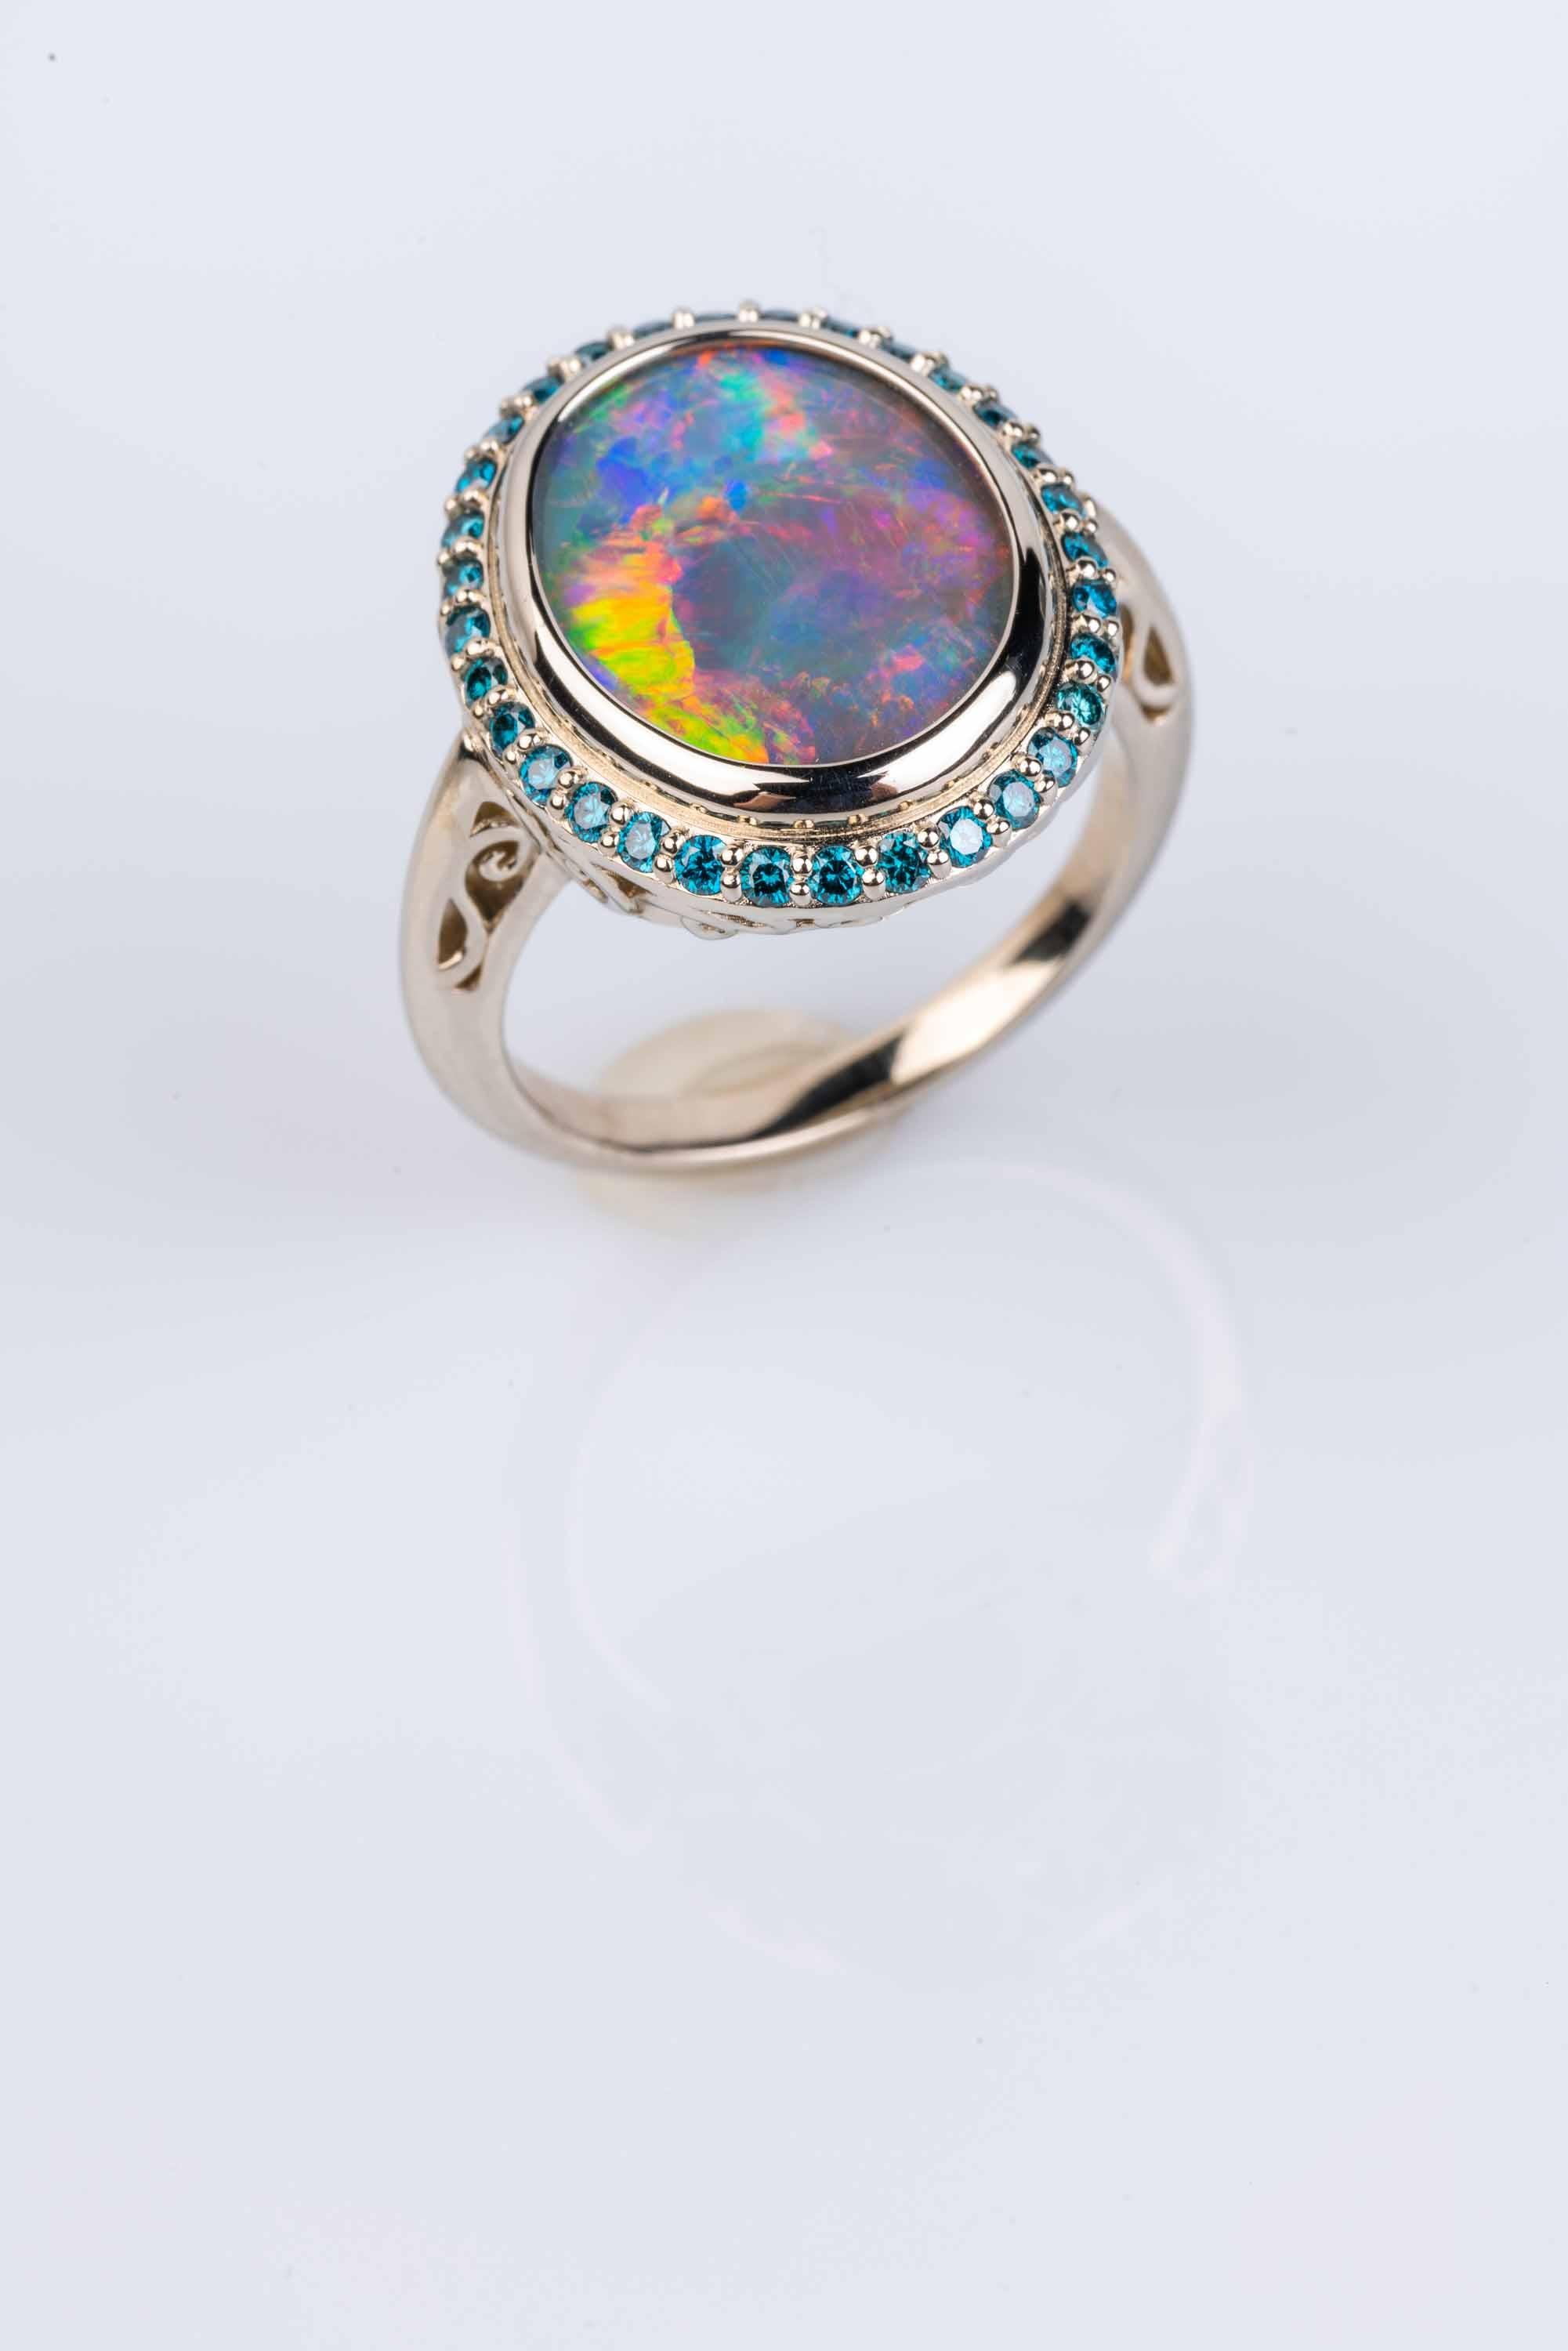 Contemporary 18 Karat White Gold Black Opal Ring with Teal Blue Diamond Halo